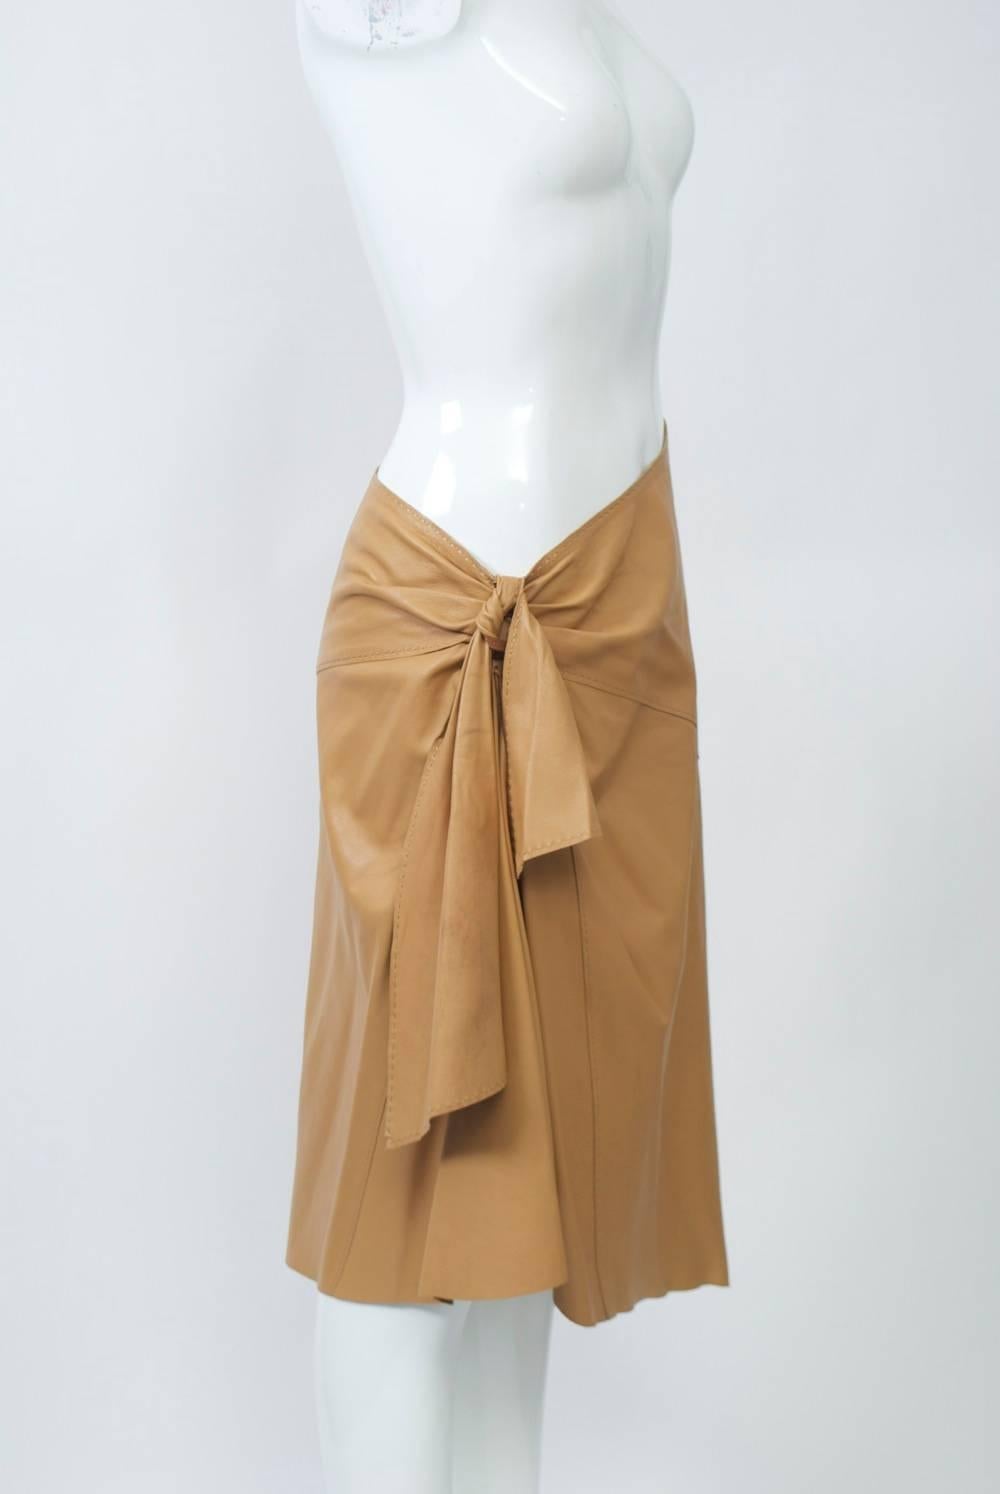 Hermes Leather skirt In Excellent Condition For Sale In Alford, MA